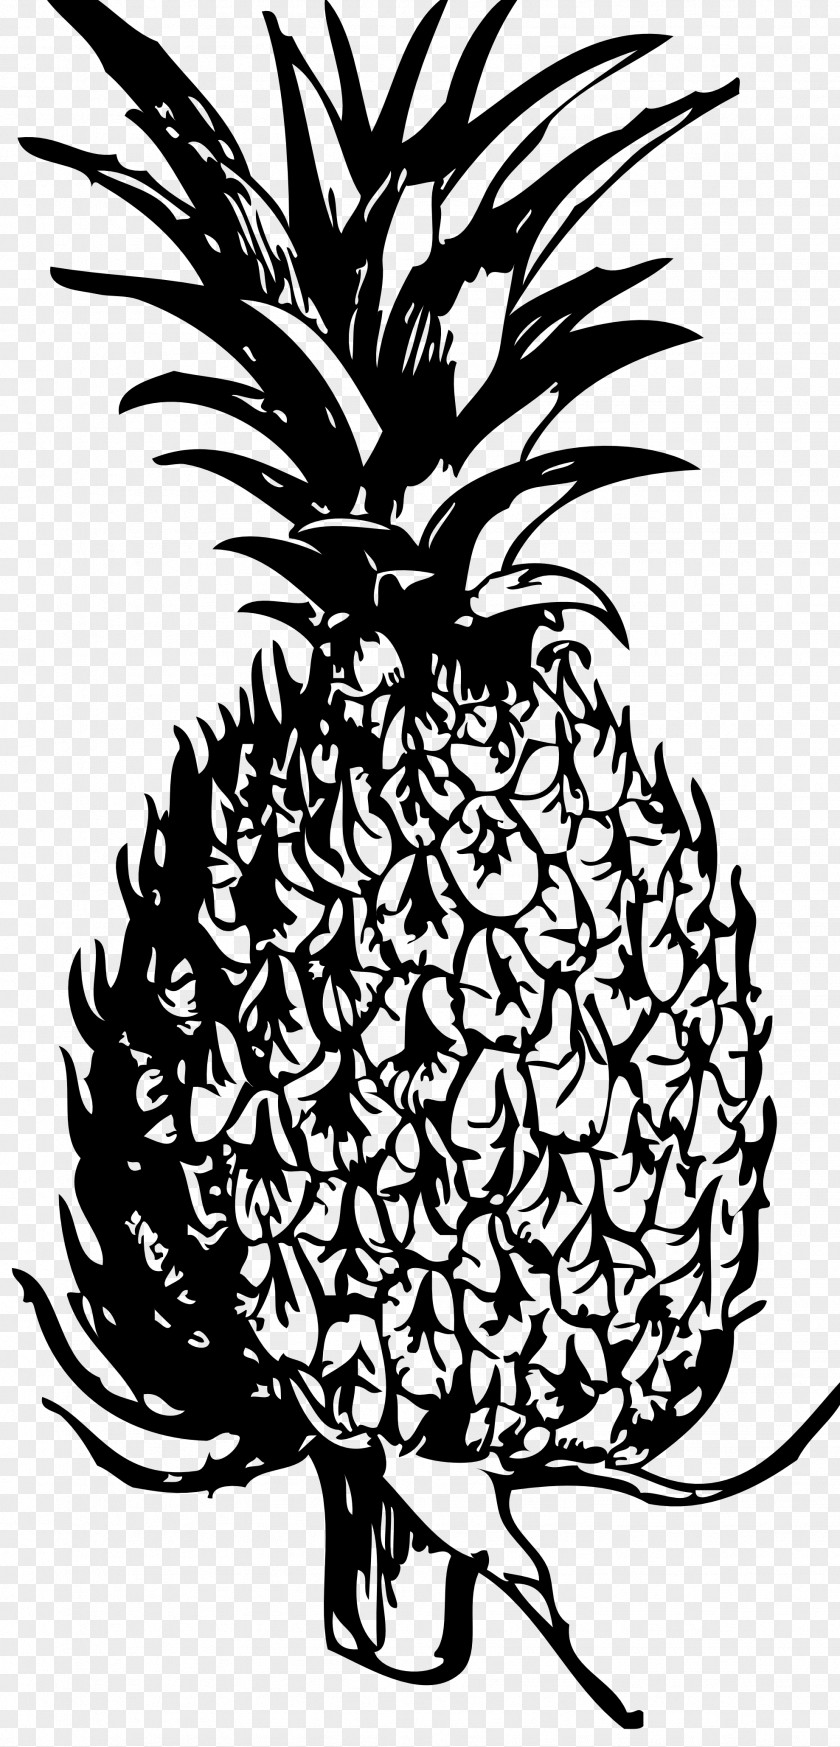 Pineapple Blog Black And White Clip Art PNG